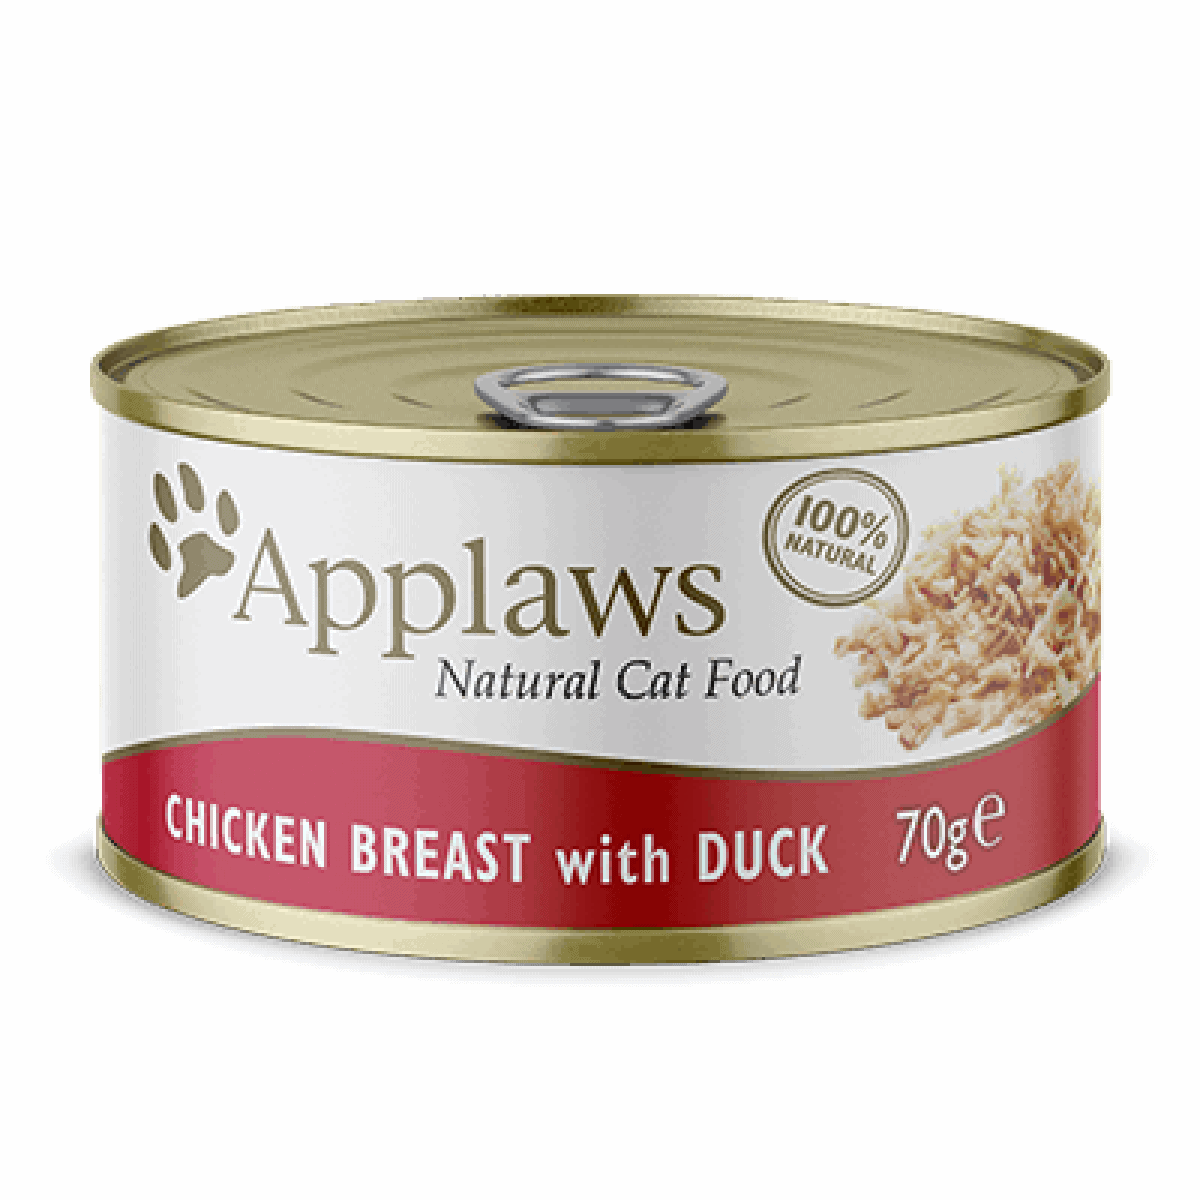 Applaws Chicken Breast with Duck 70g – Pawfect Supplies Ltd Product Image